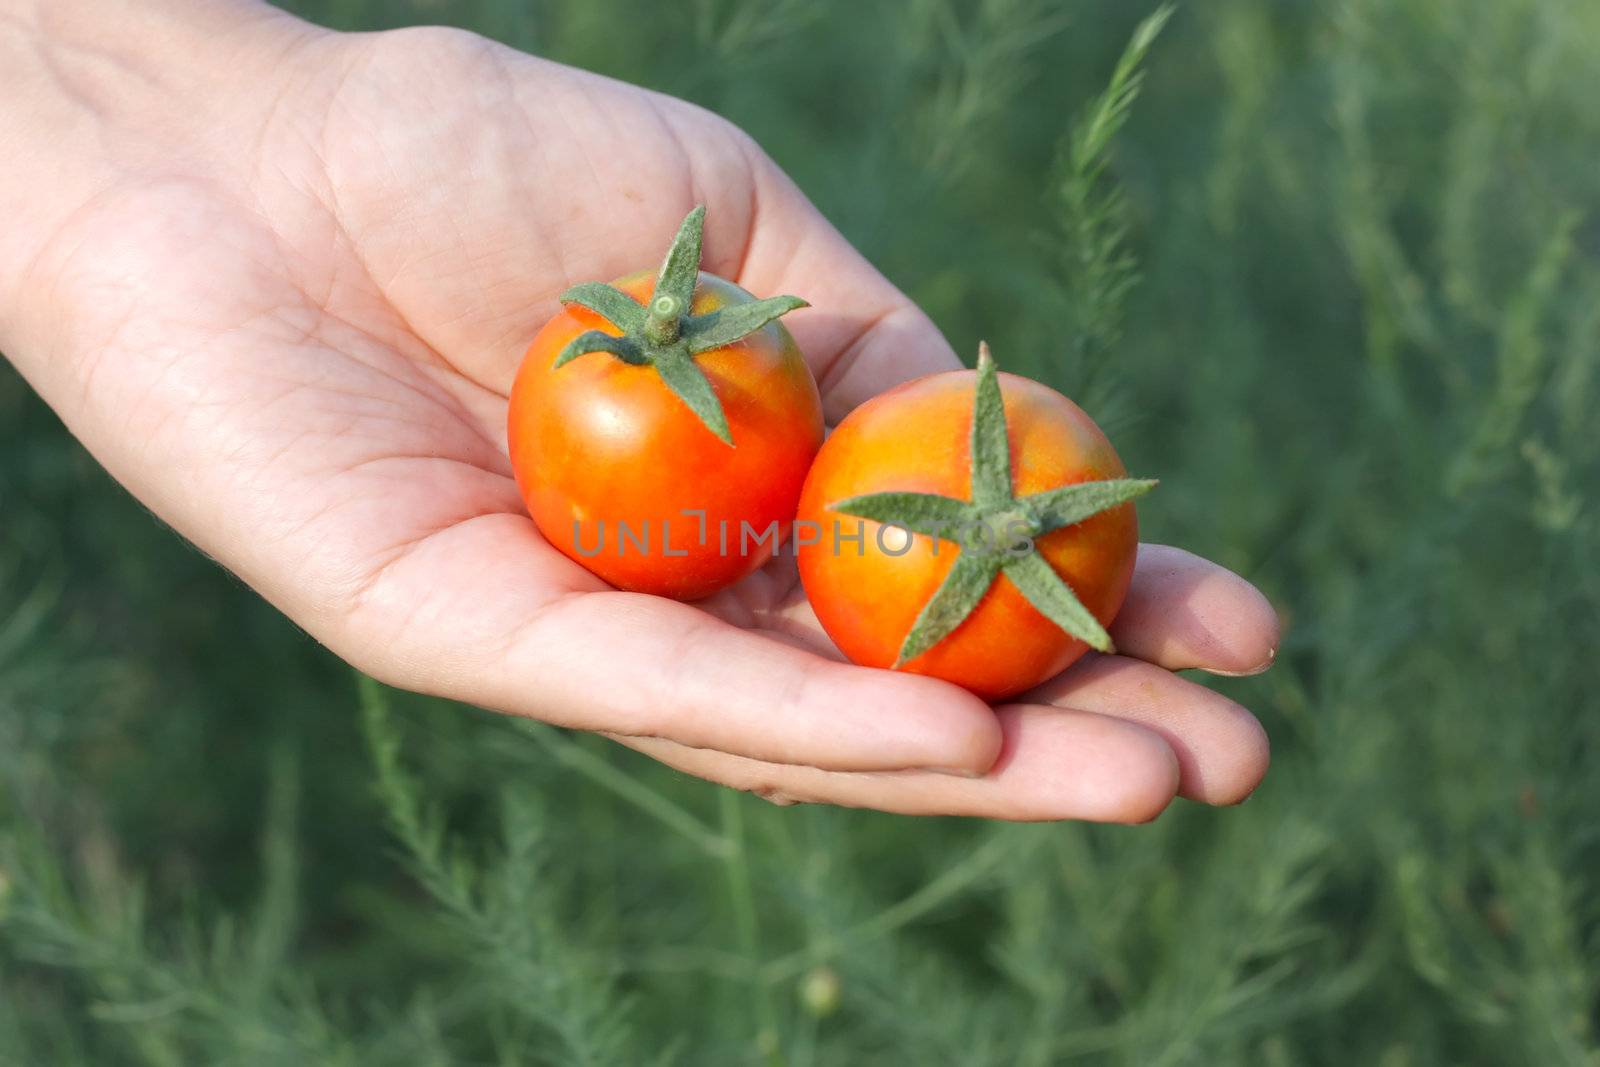 Tomatoes on the palm. Shallow DOF. by sergpet